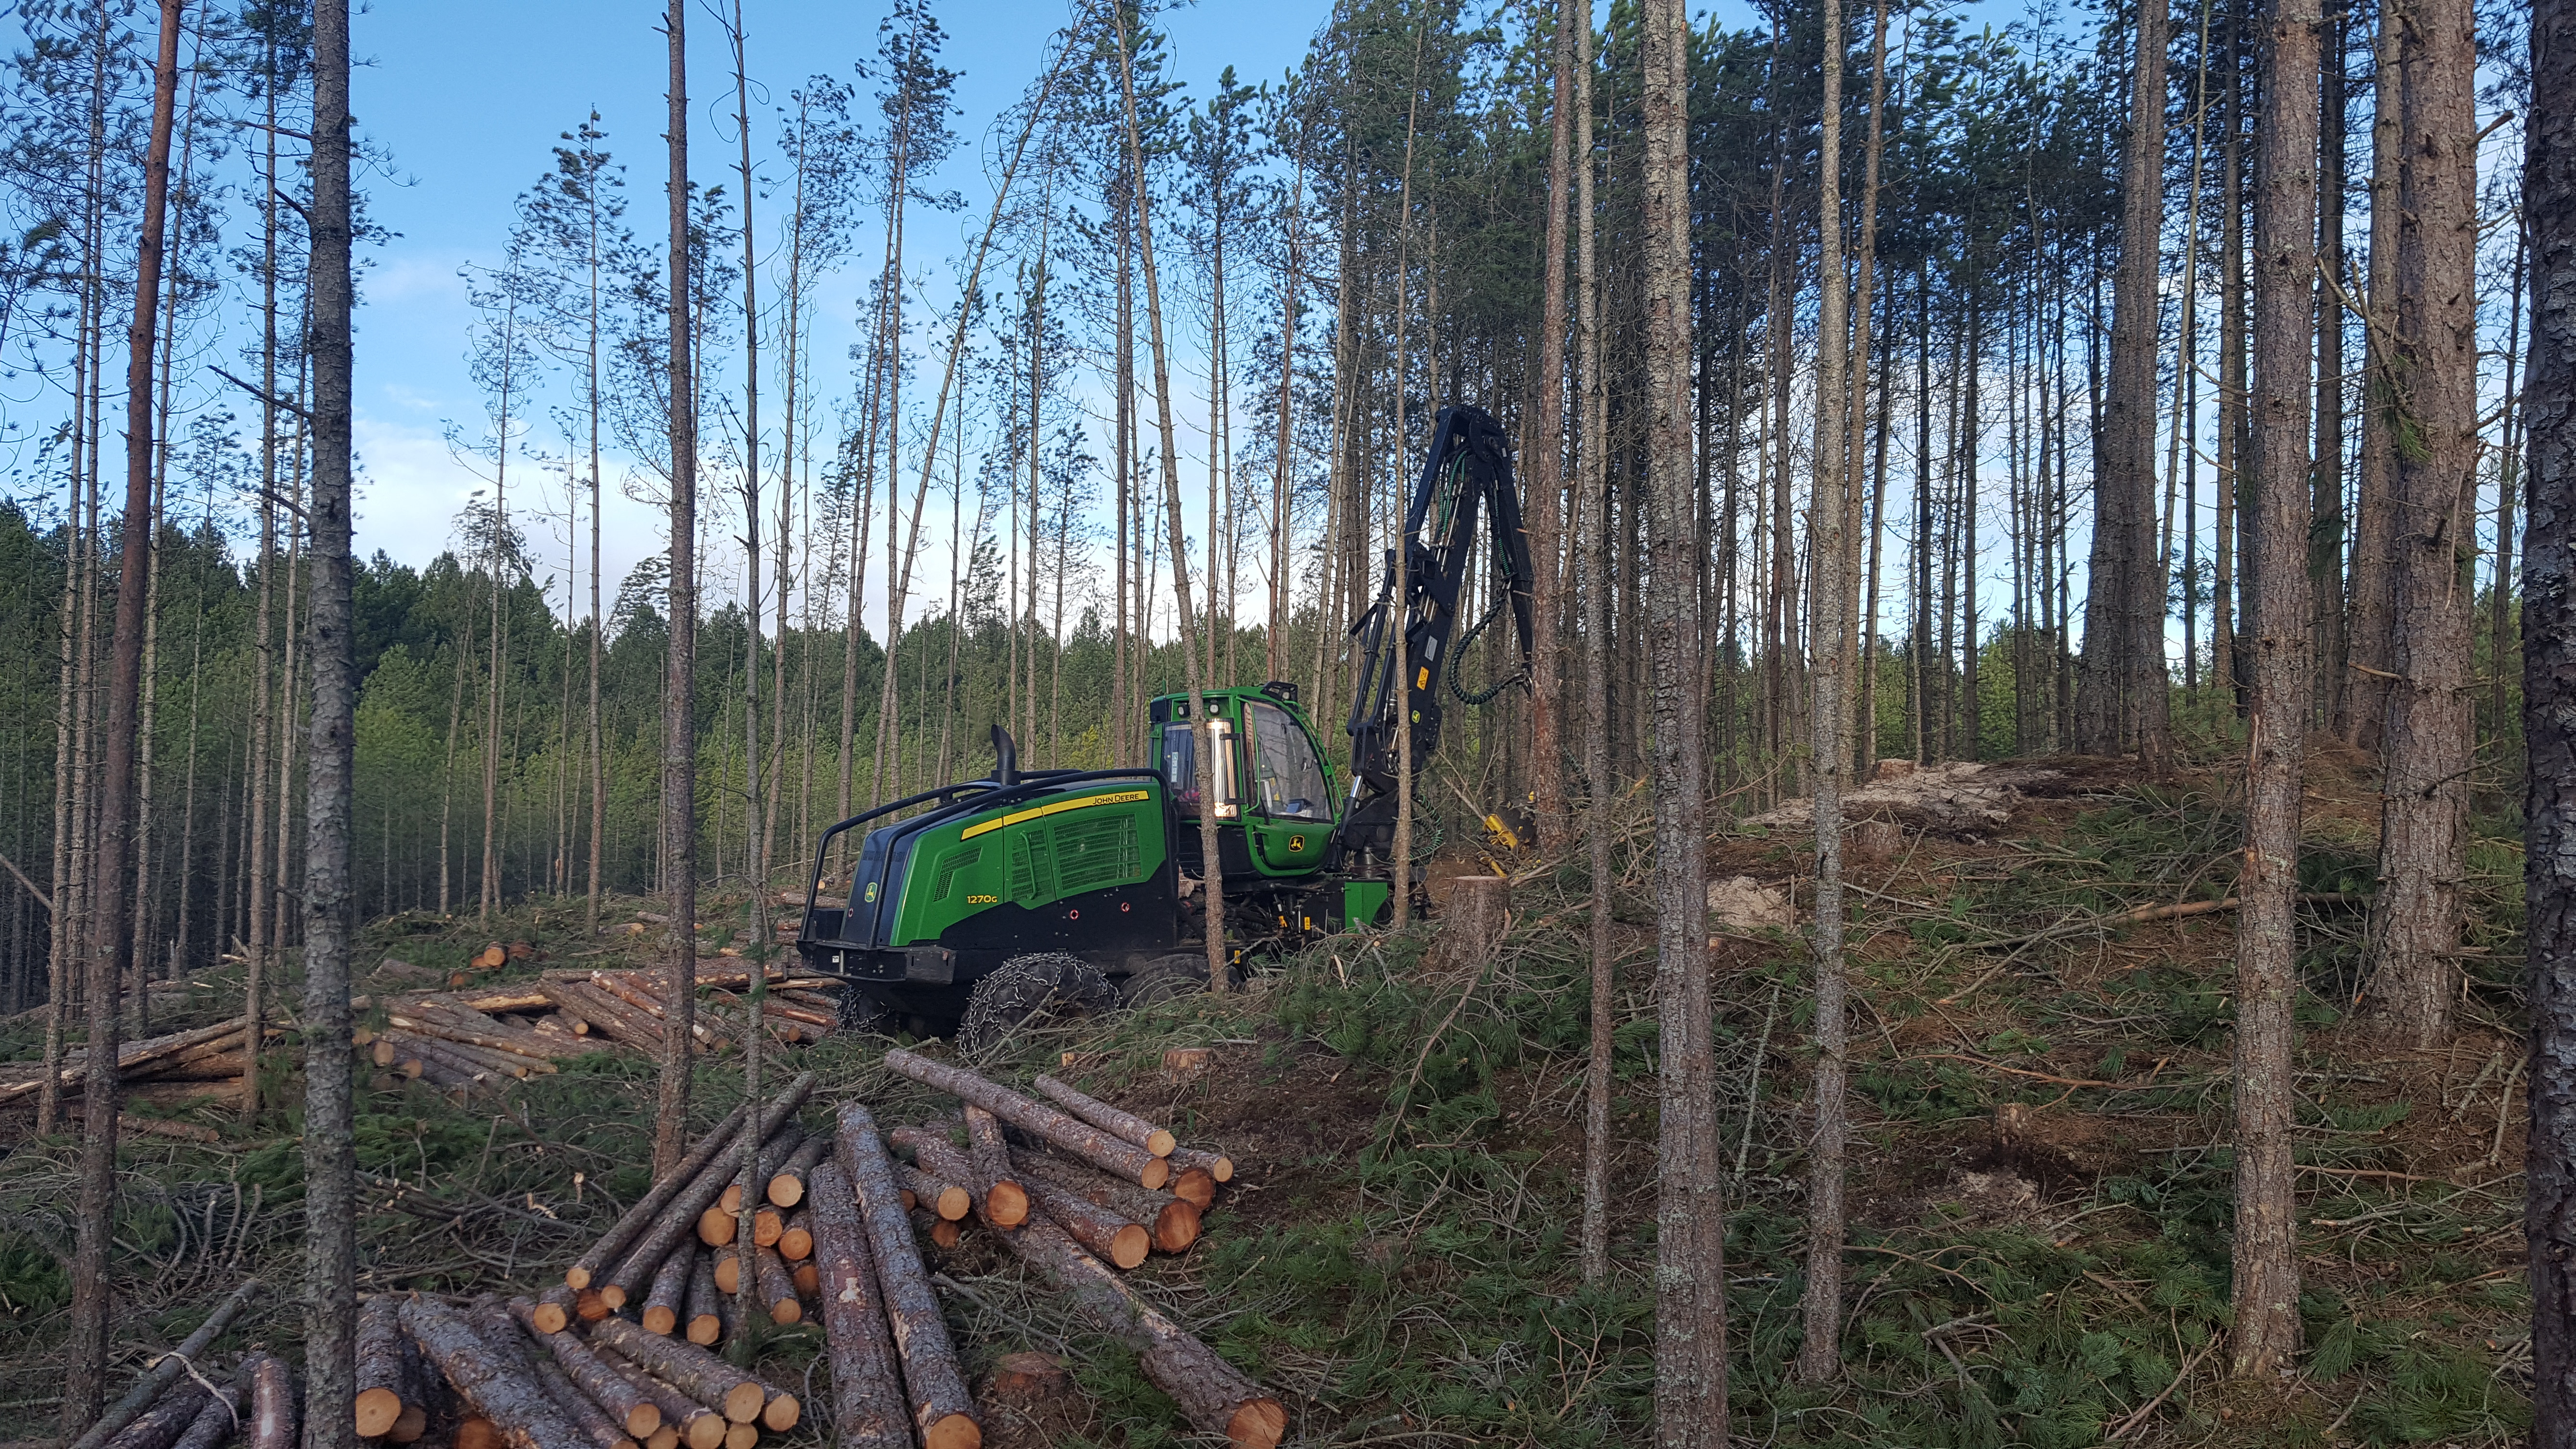 Forestry equipment removing timber from a pine forest